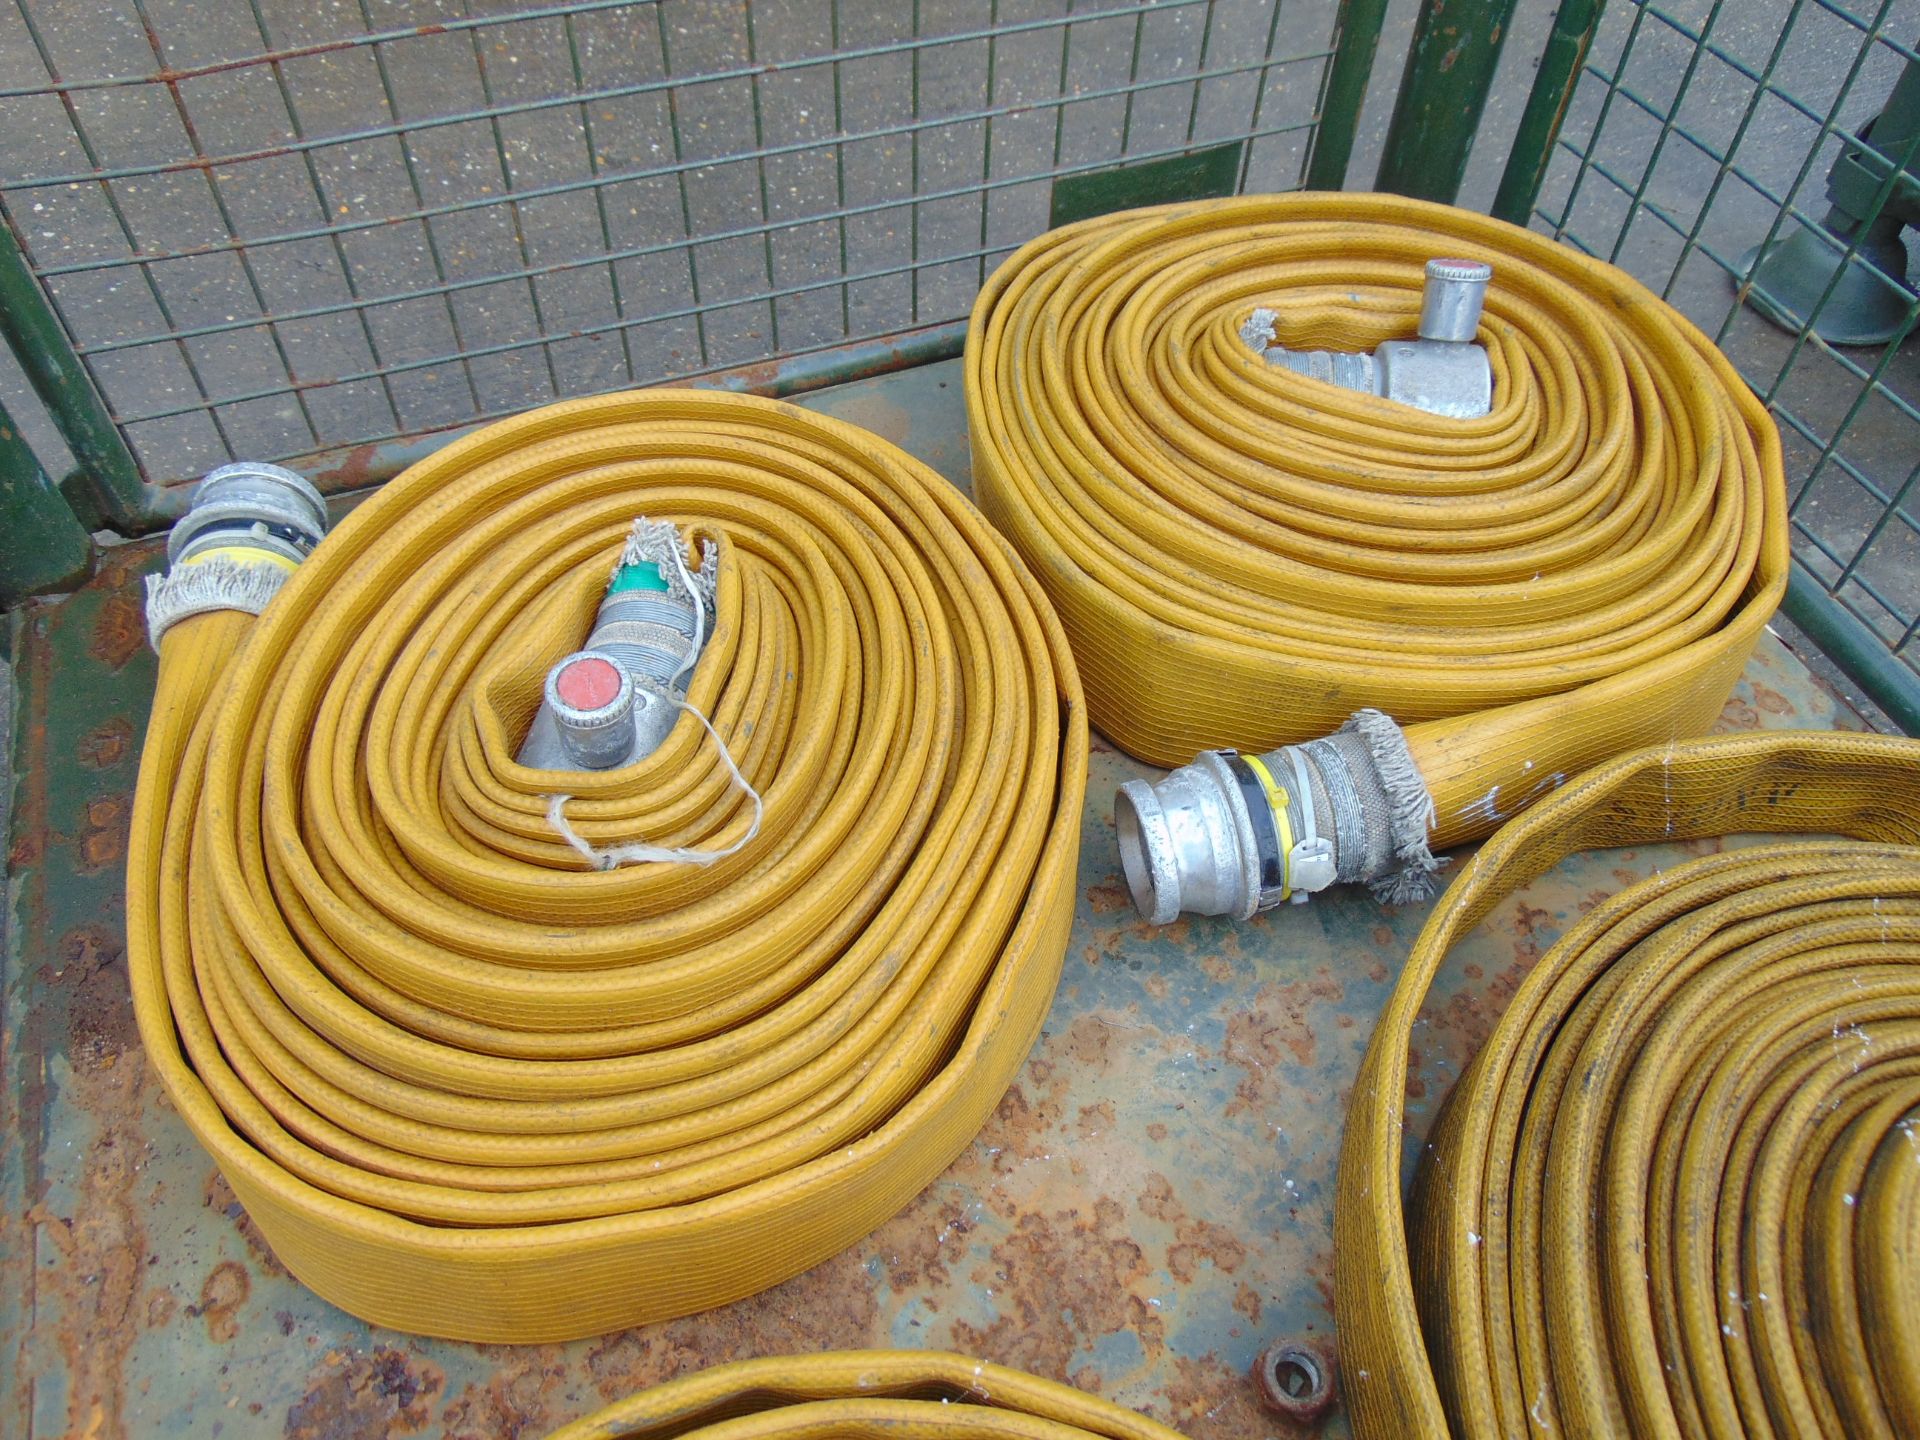 4 x Angus Layflat Fire Hoses with Couplings - Image 2 of 3